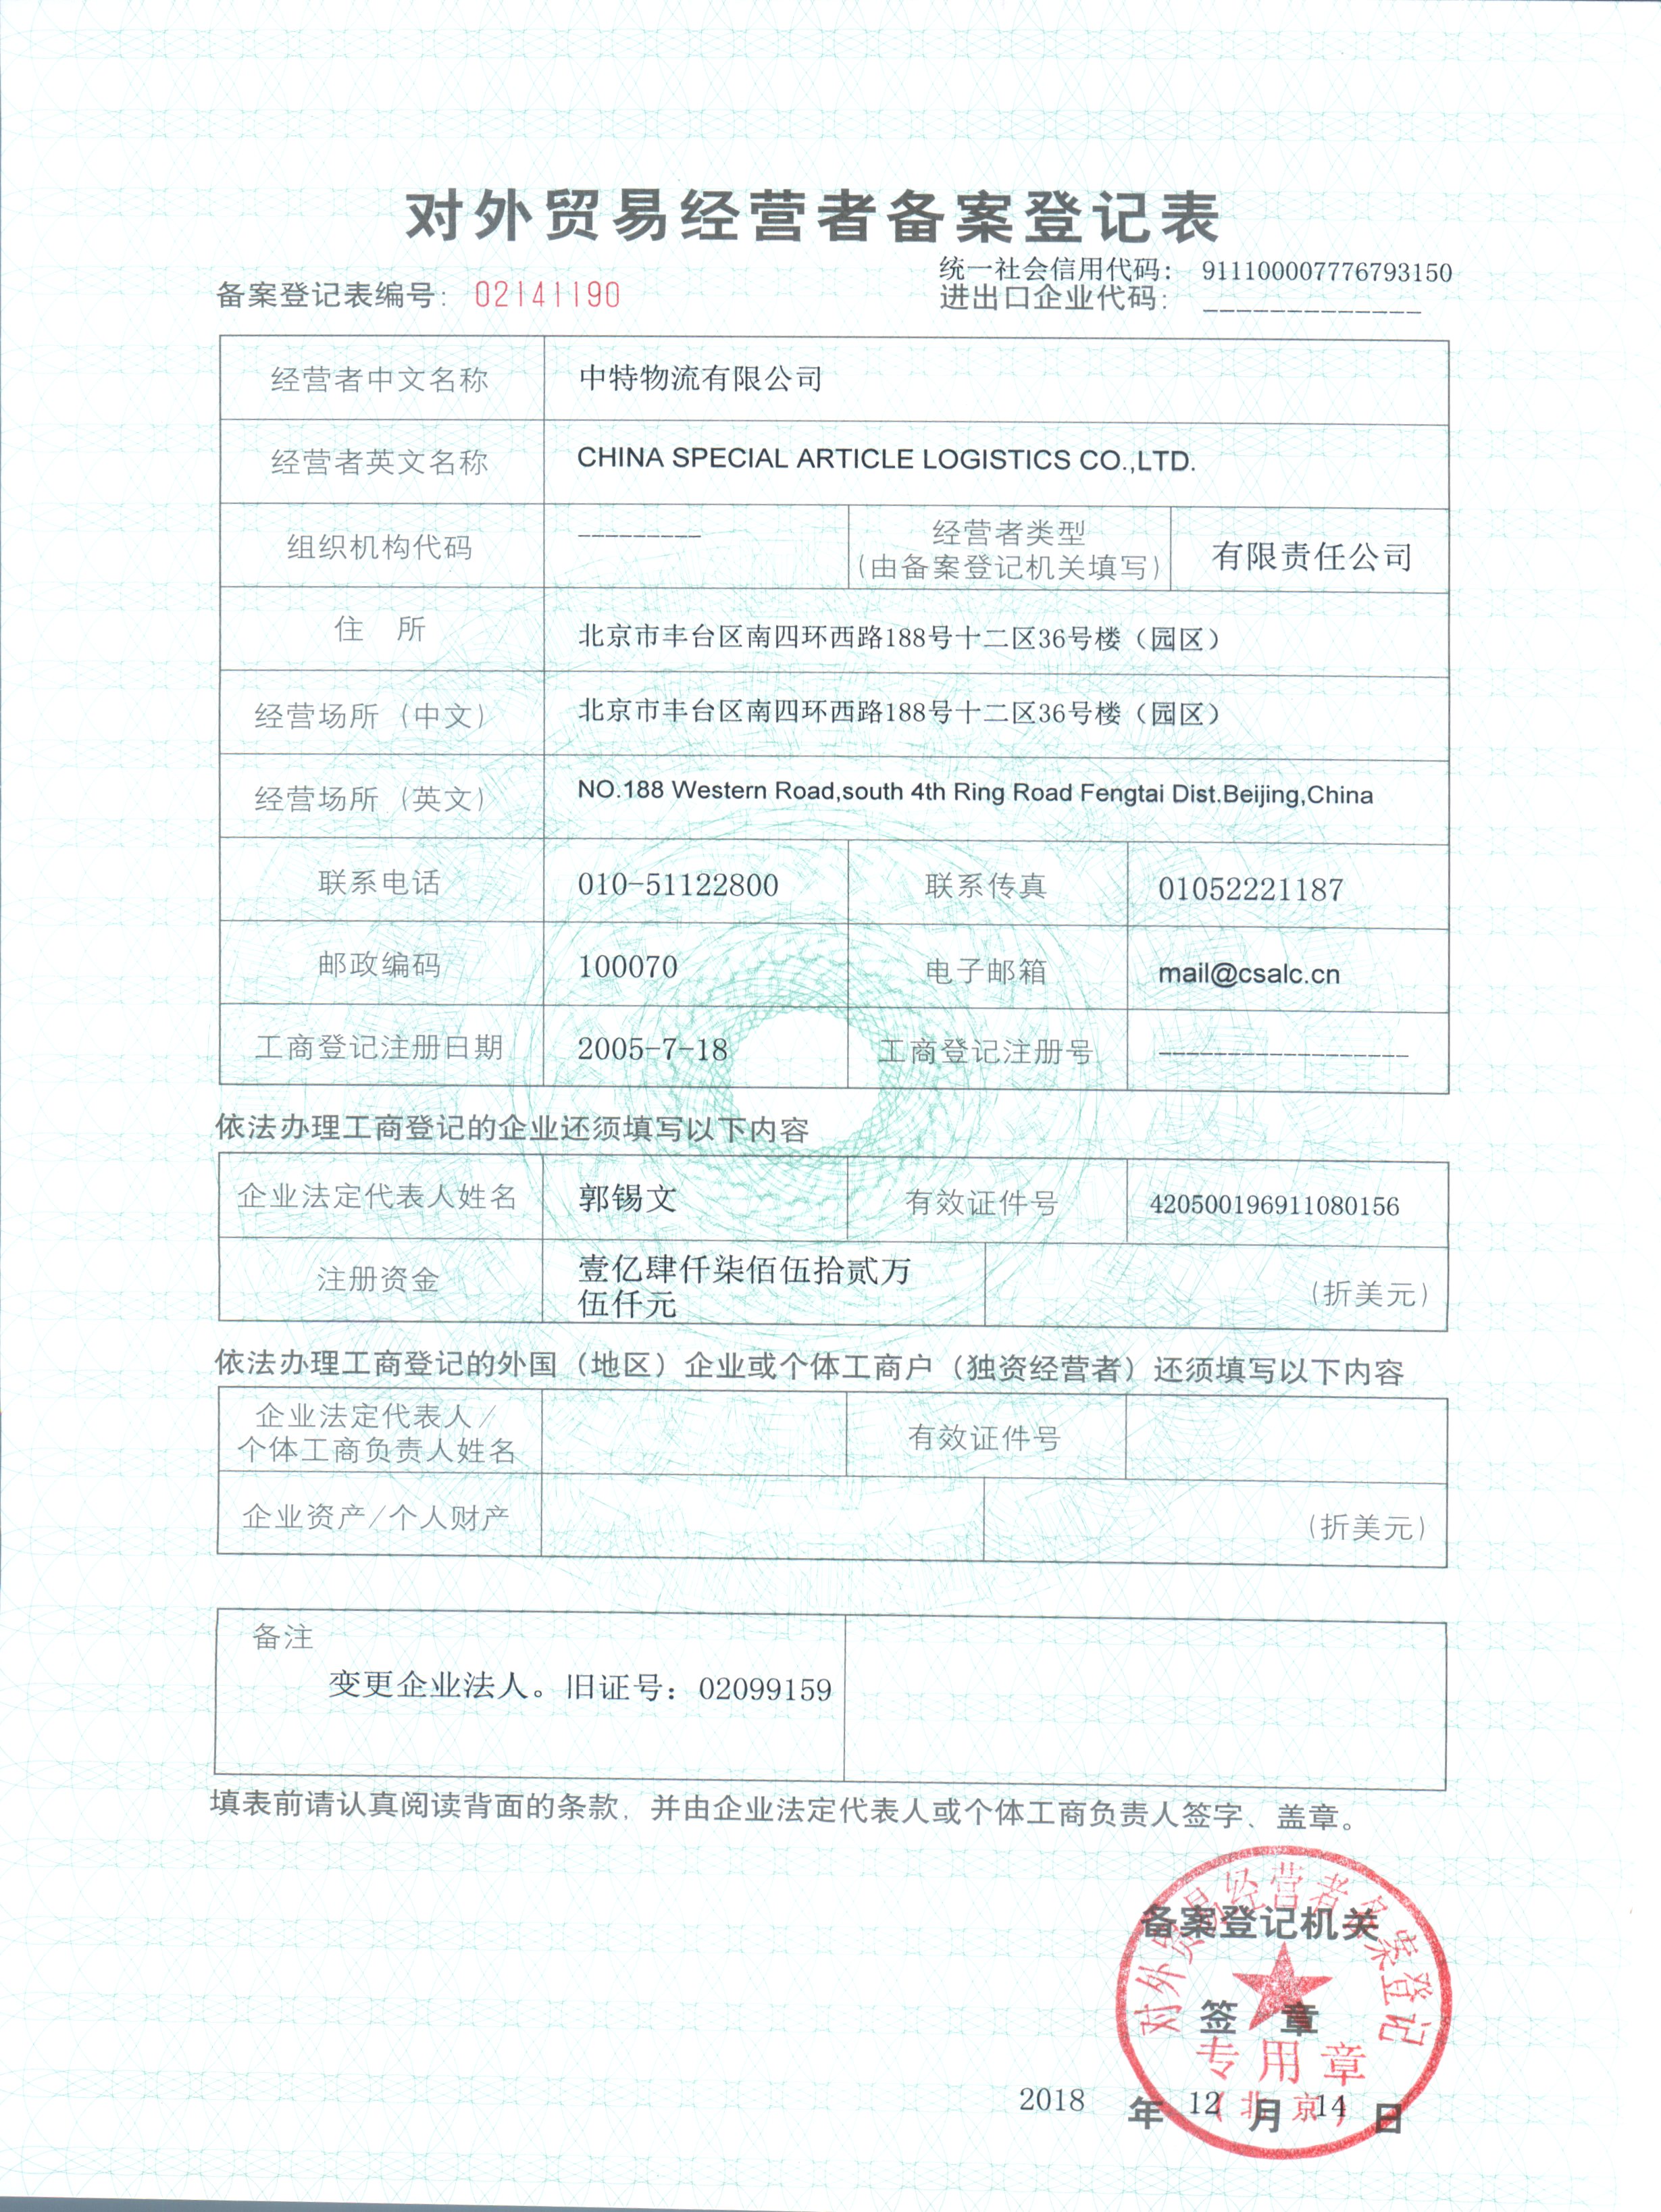 Registration Form of Foreign Trade Operators